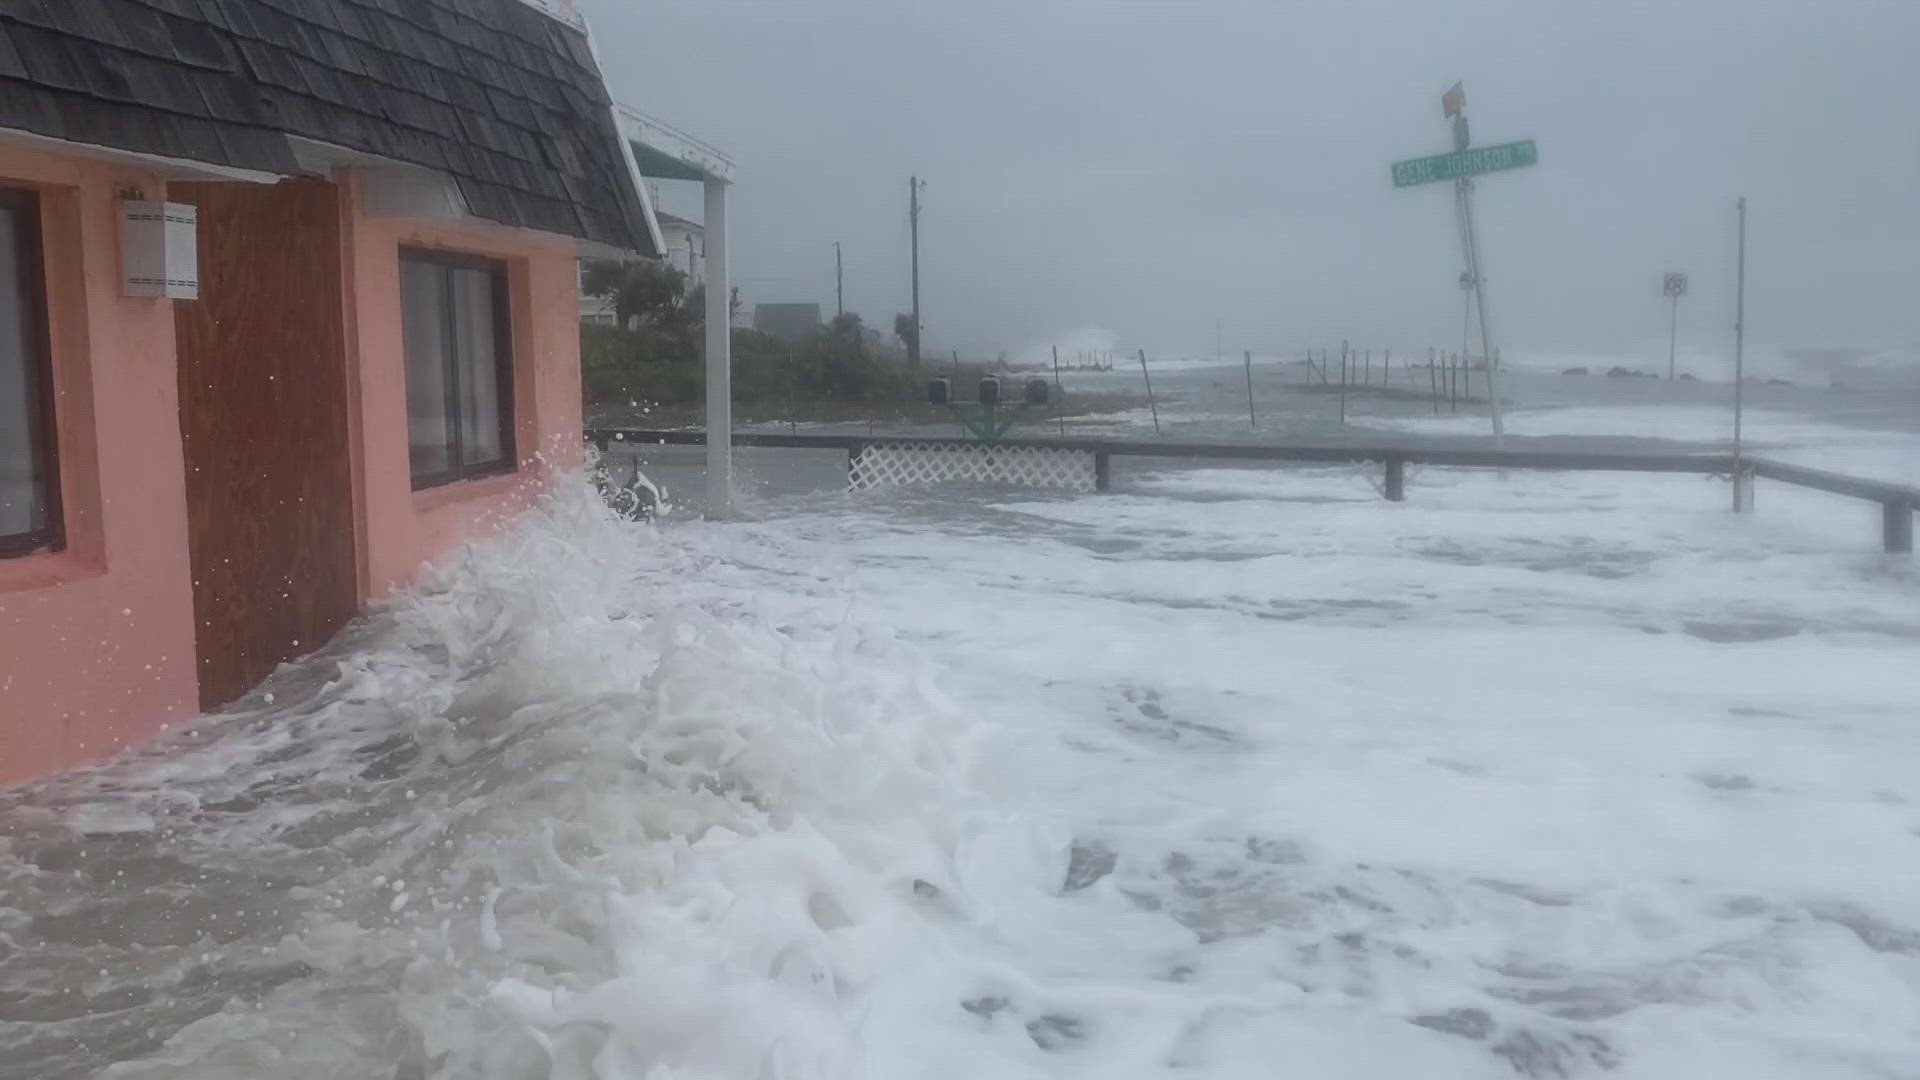 Rushing flood waters from Nicole captured on video. Credit: Jeff Green